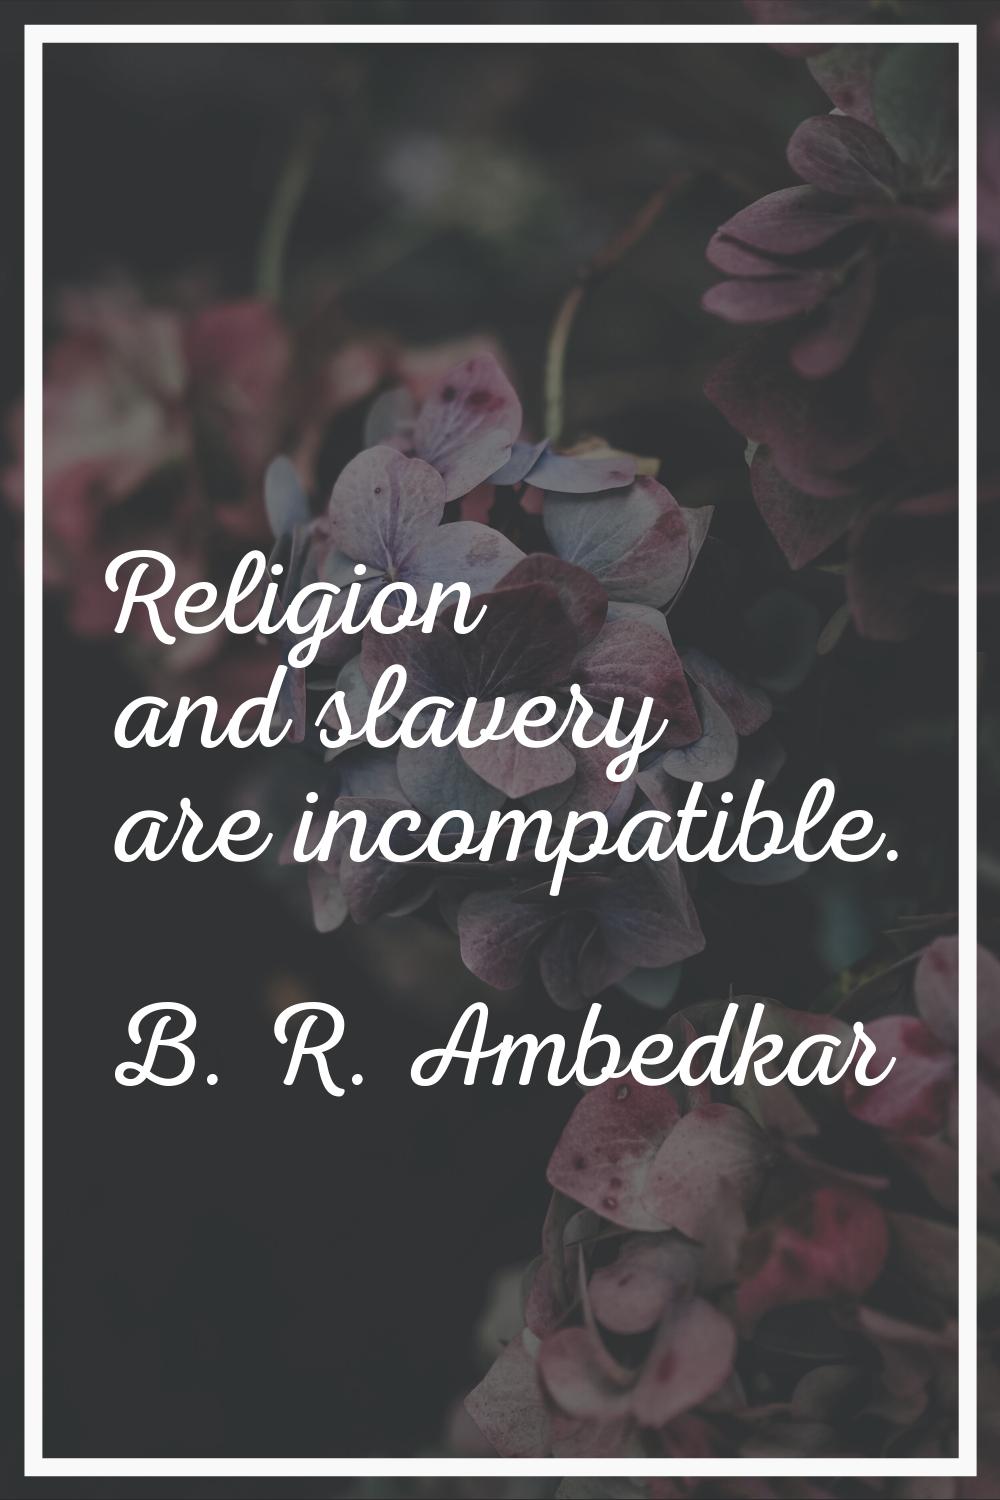 Religion and slavery are incompatible.